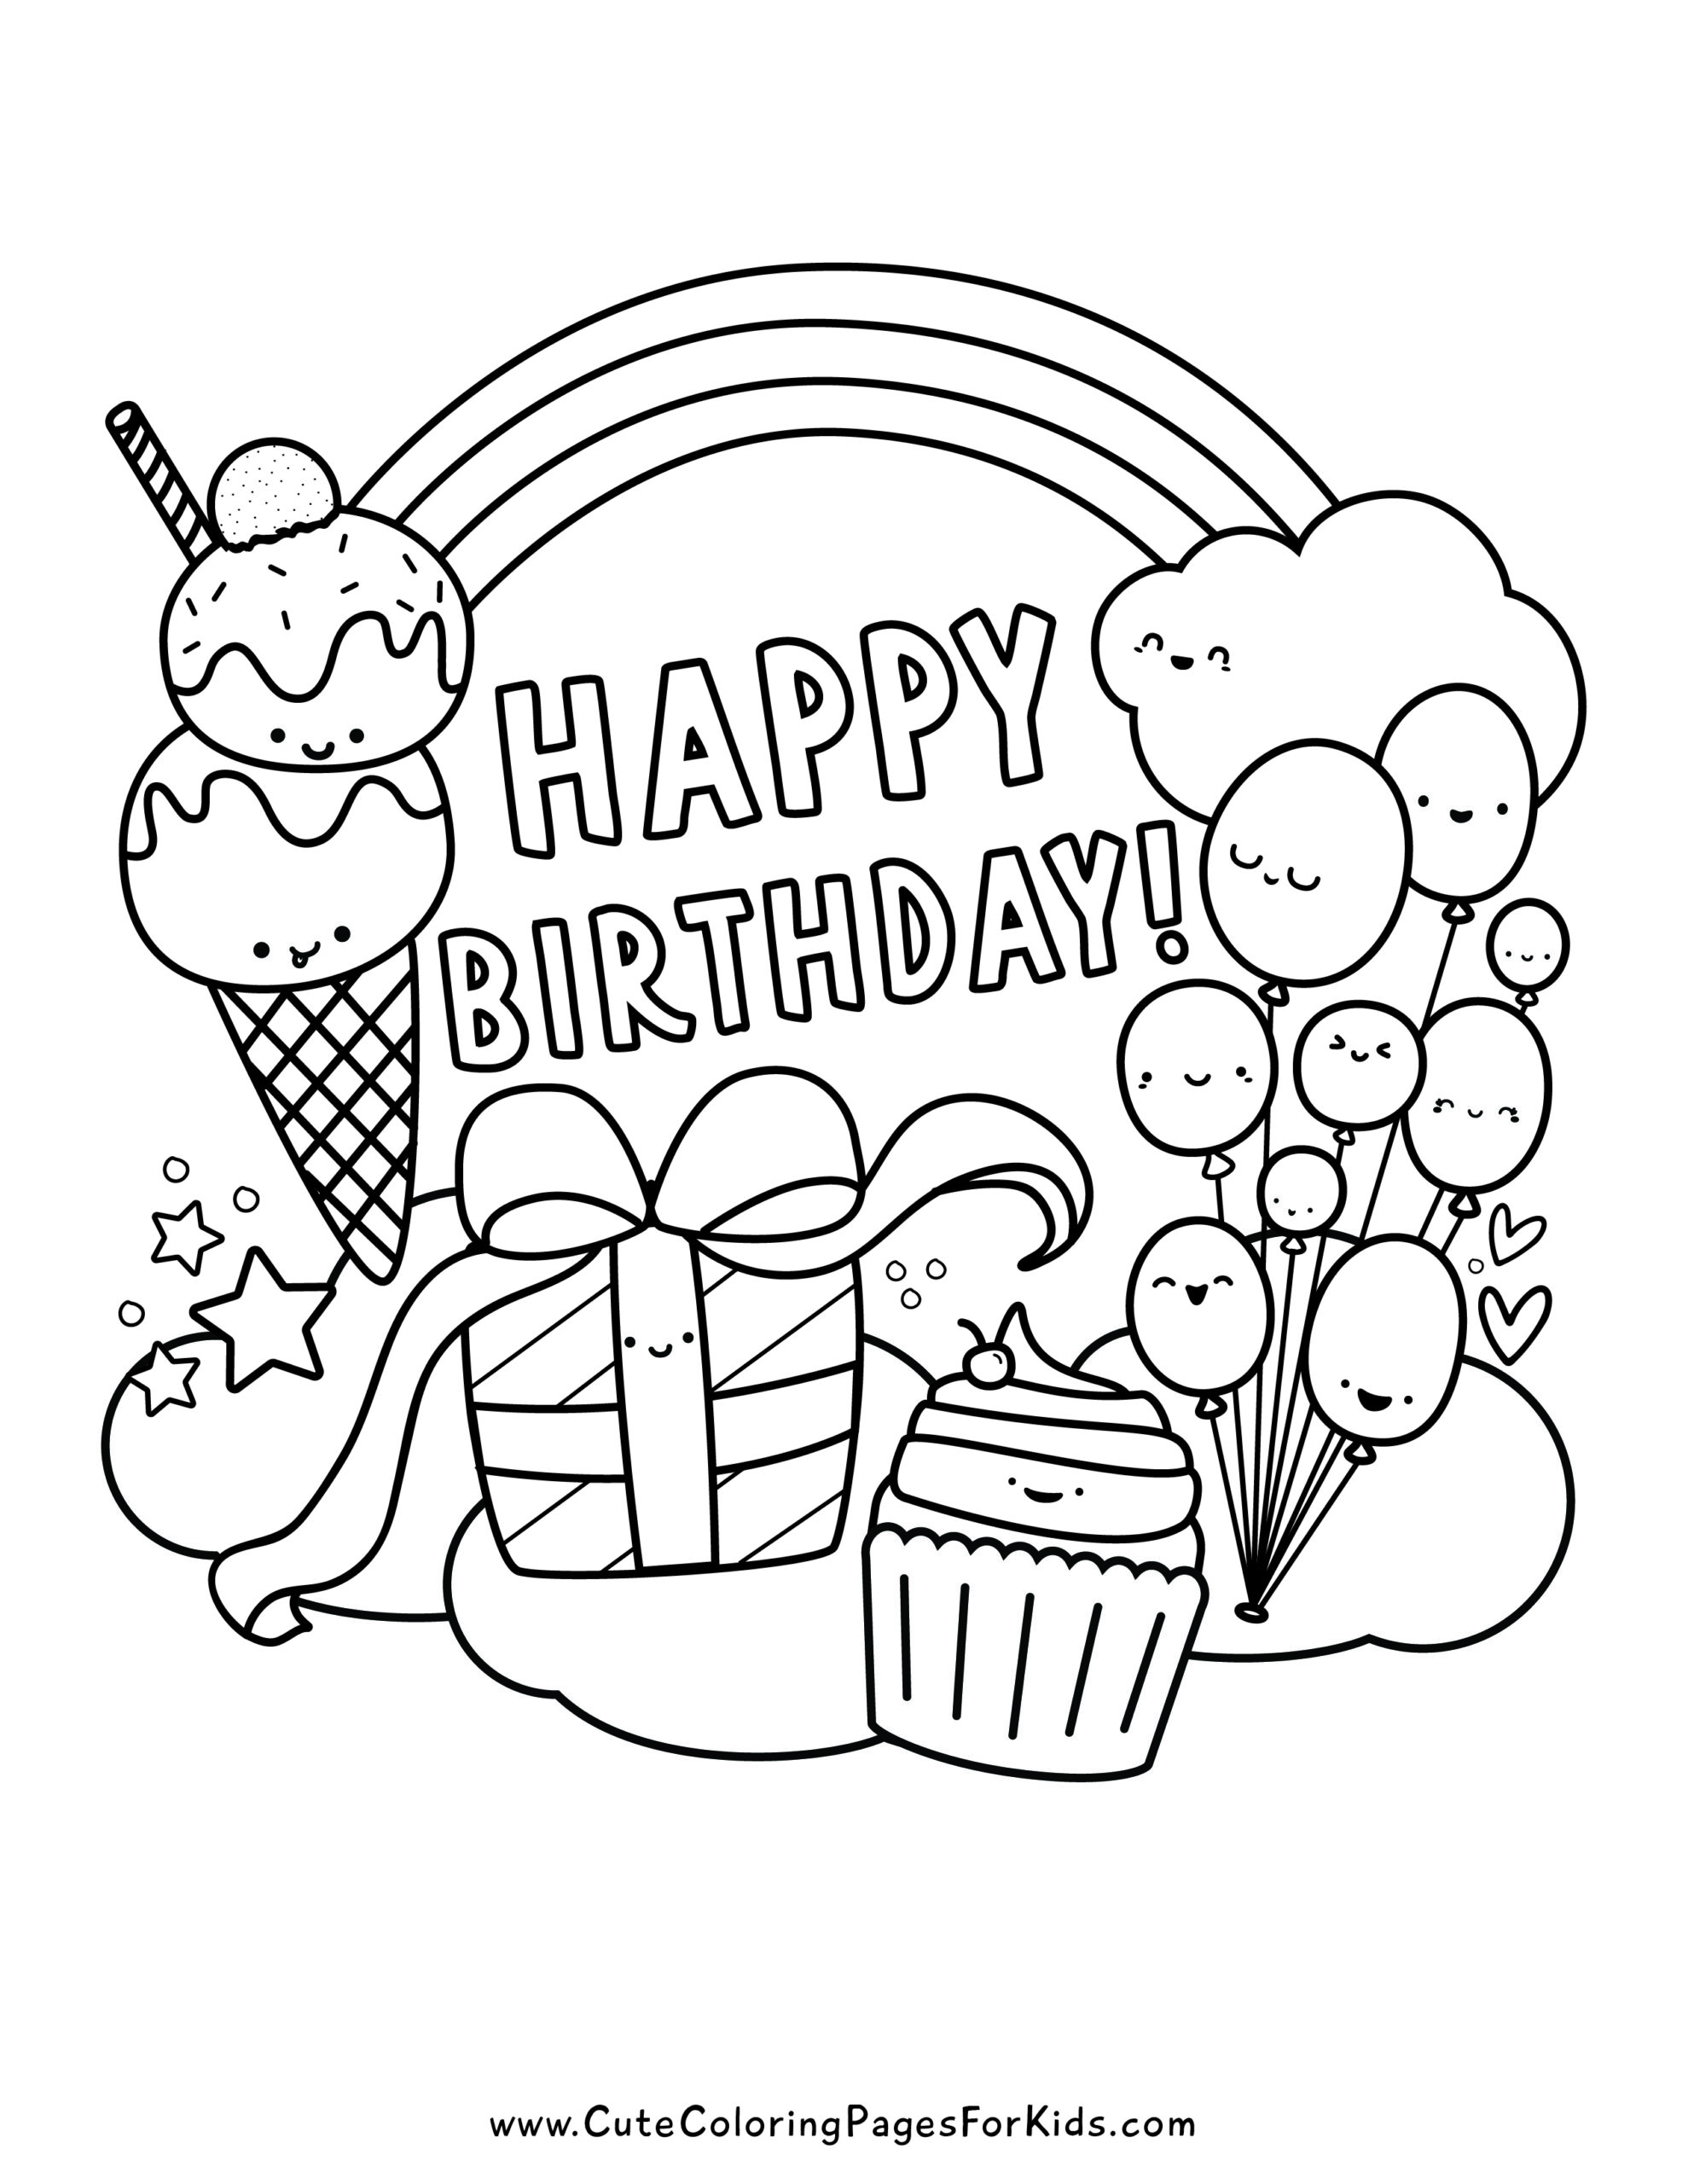 Free Printable Birthday Coloring Pages - Cute Coloring Pages For Kids